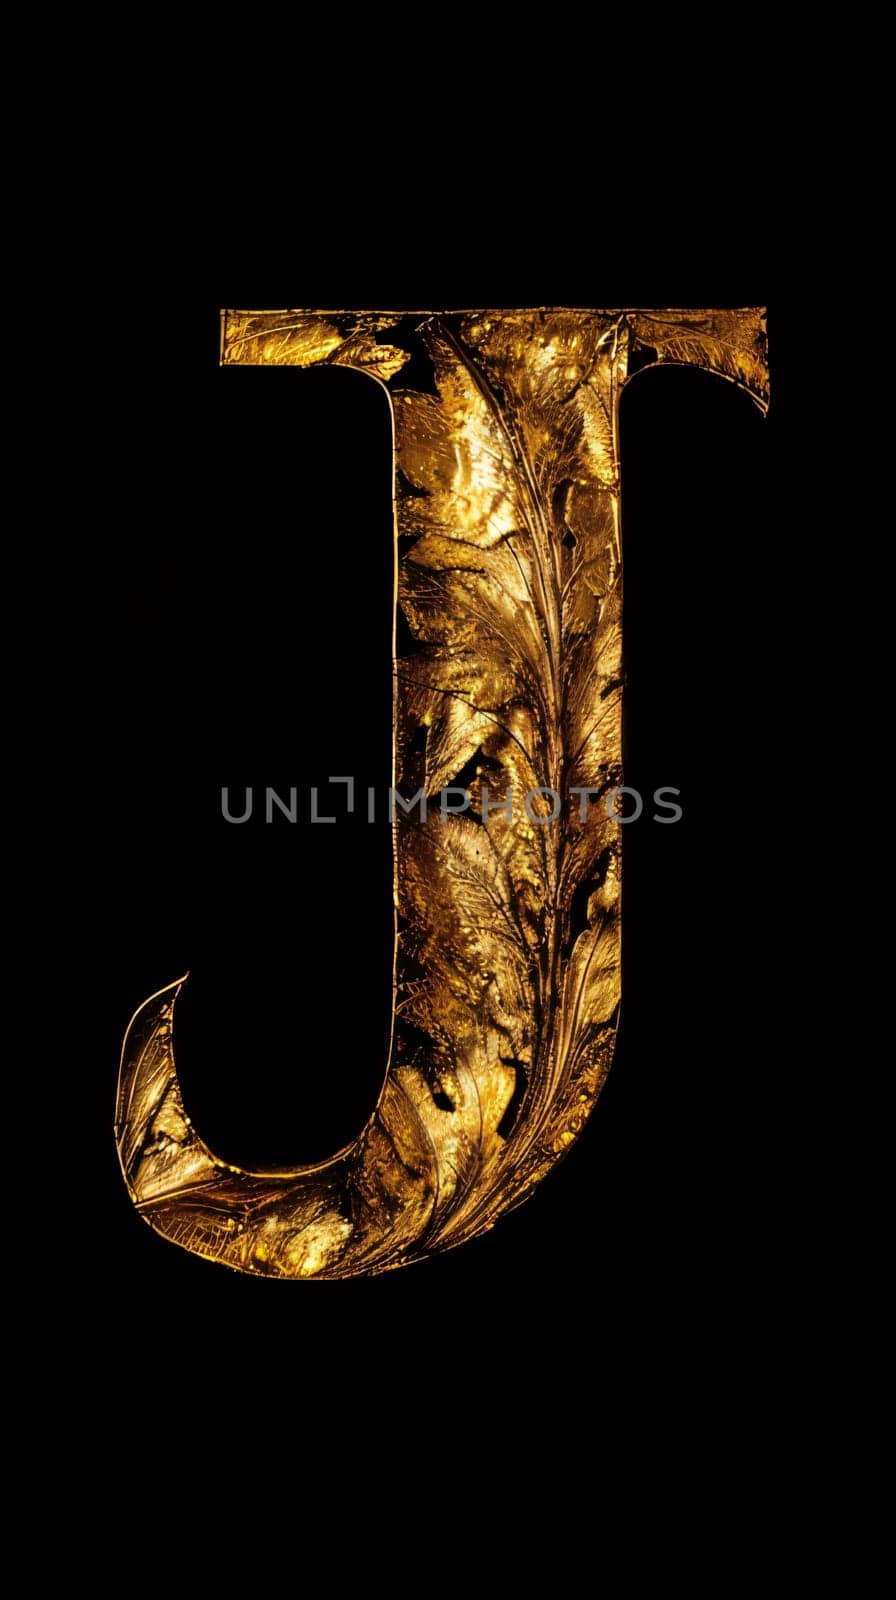 Graphic alphabet letters: The letter J in the old style gold on a black background.